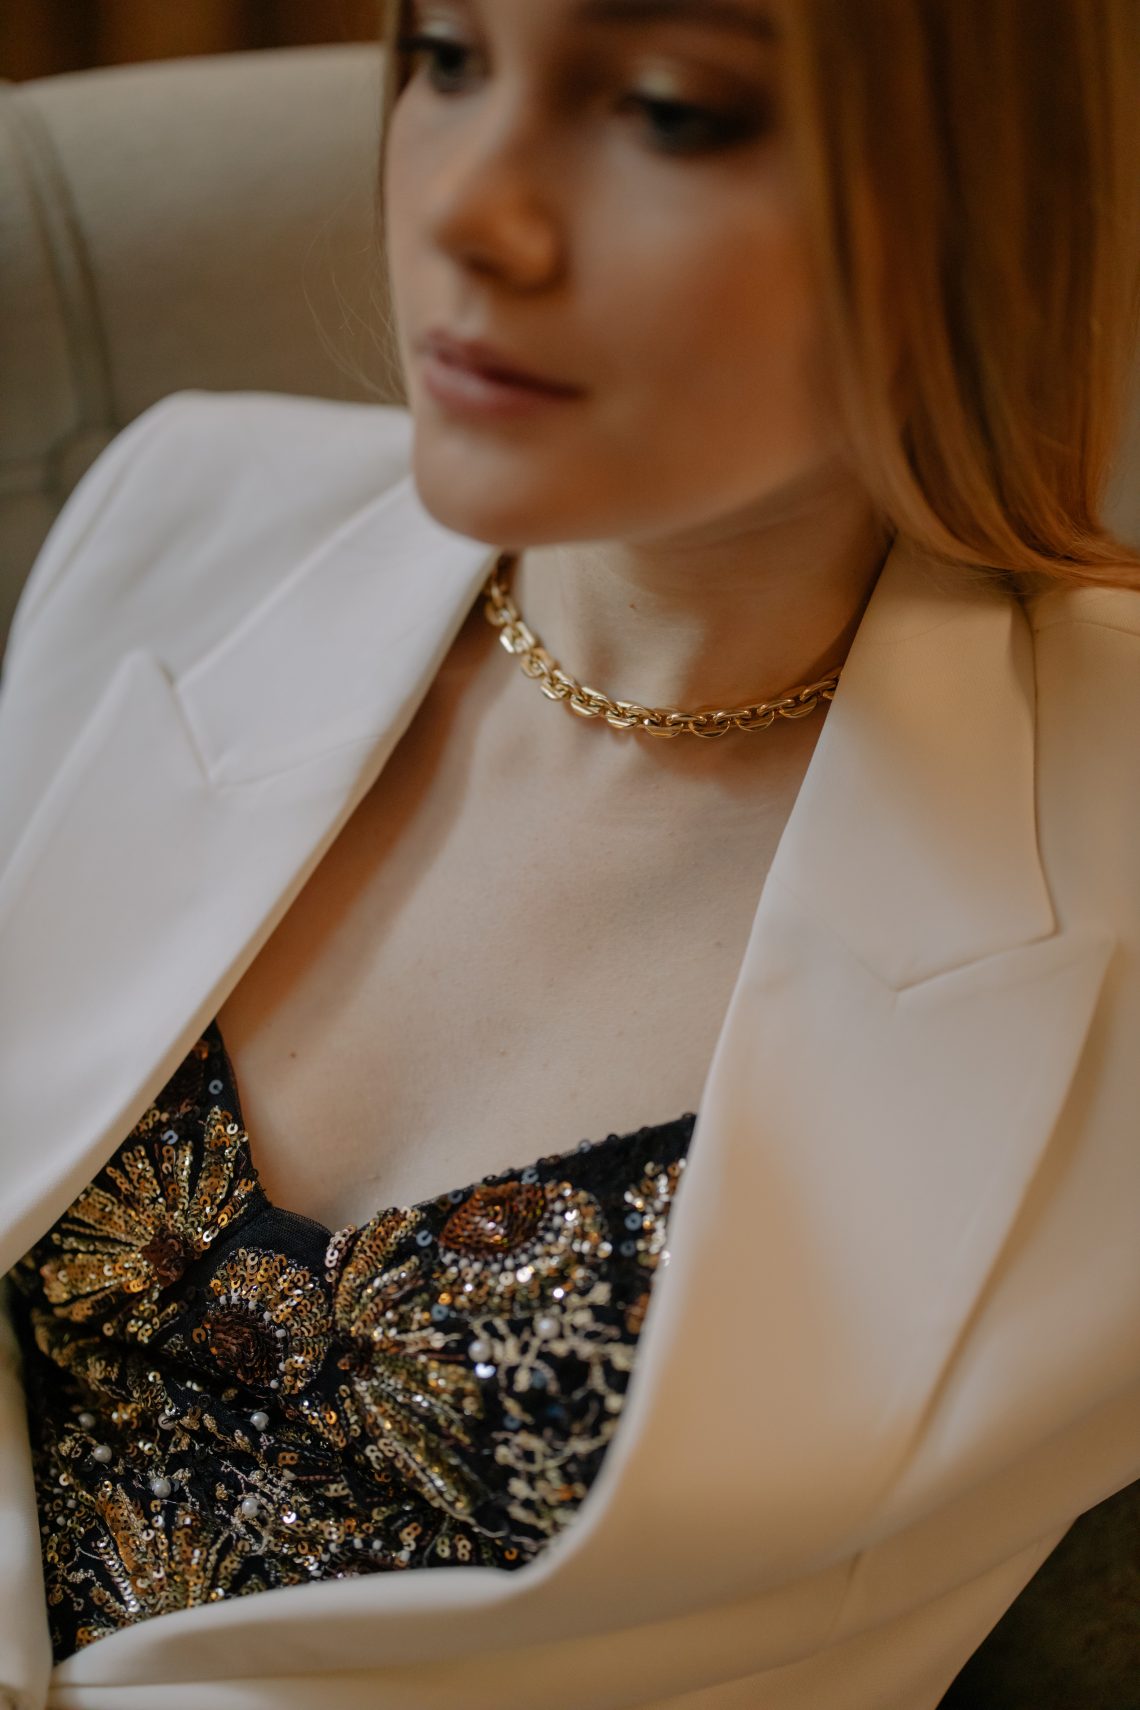 Photo of a woman wearing gold chain necklace